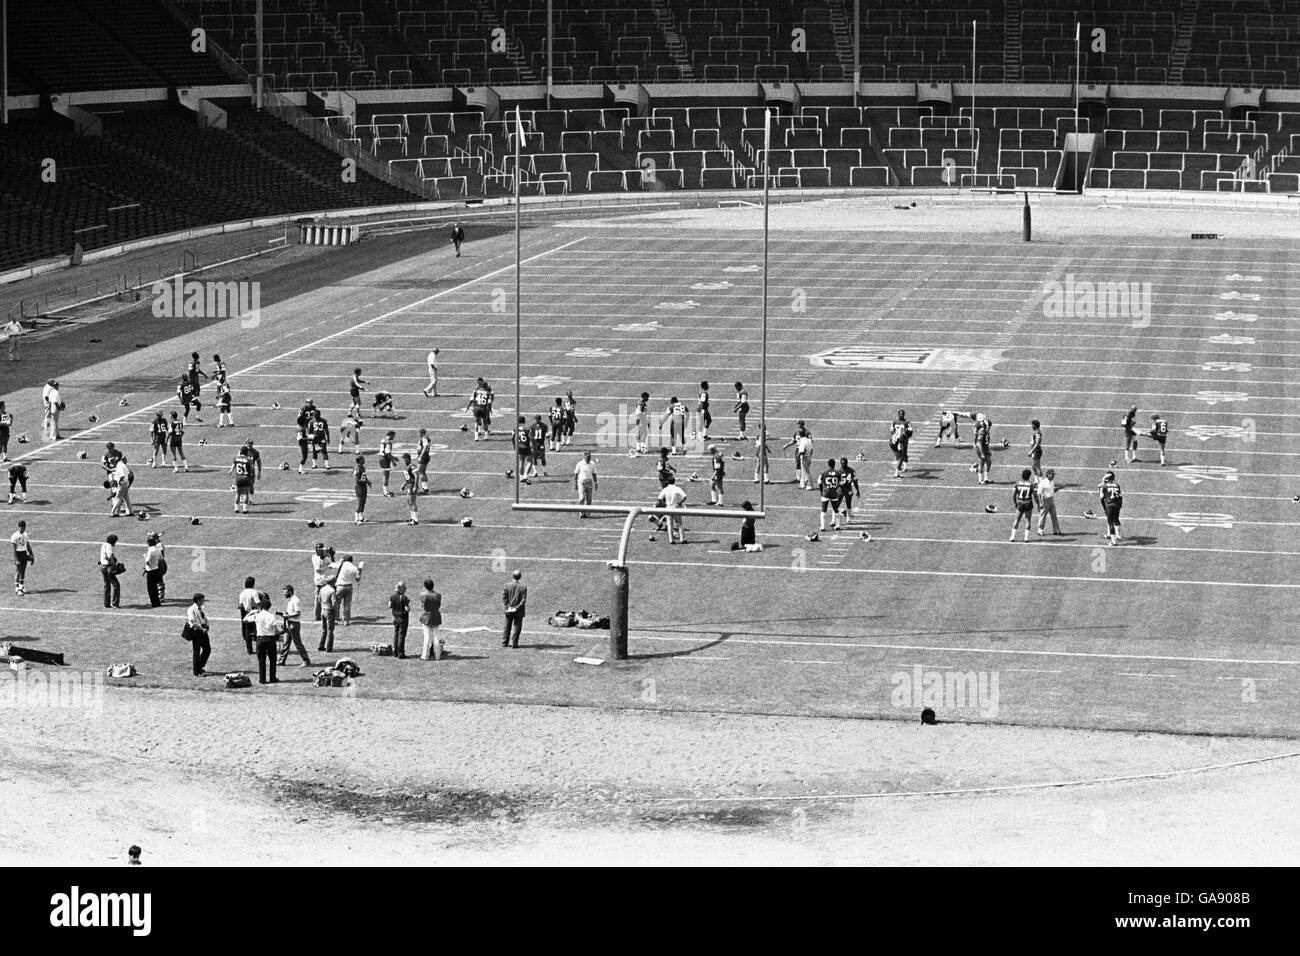 The Minnesota Vikings and the St. Louis Cardinals training at Wembley Stadium the day before the American Bowl Exhibition Match. A crowd of around 30,000 people turned up to watch the two NFL teams in action. Stock Photo